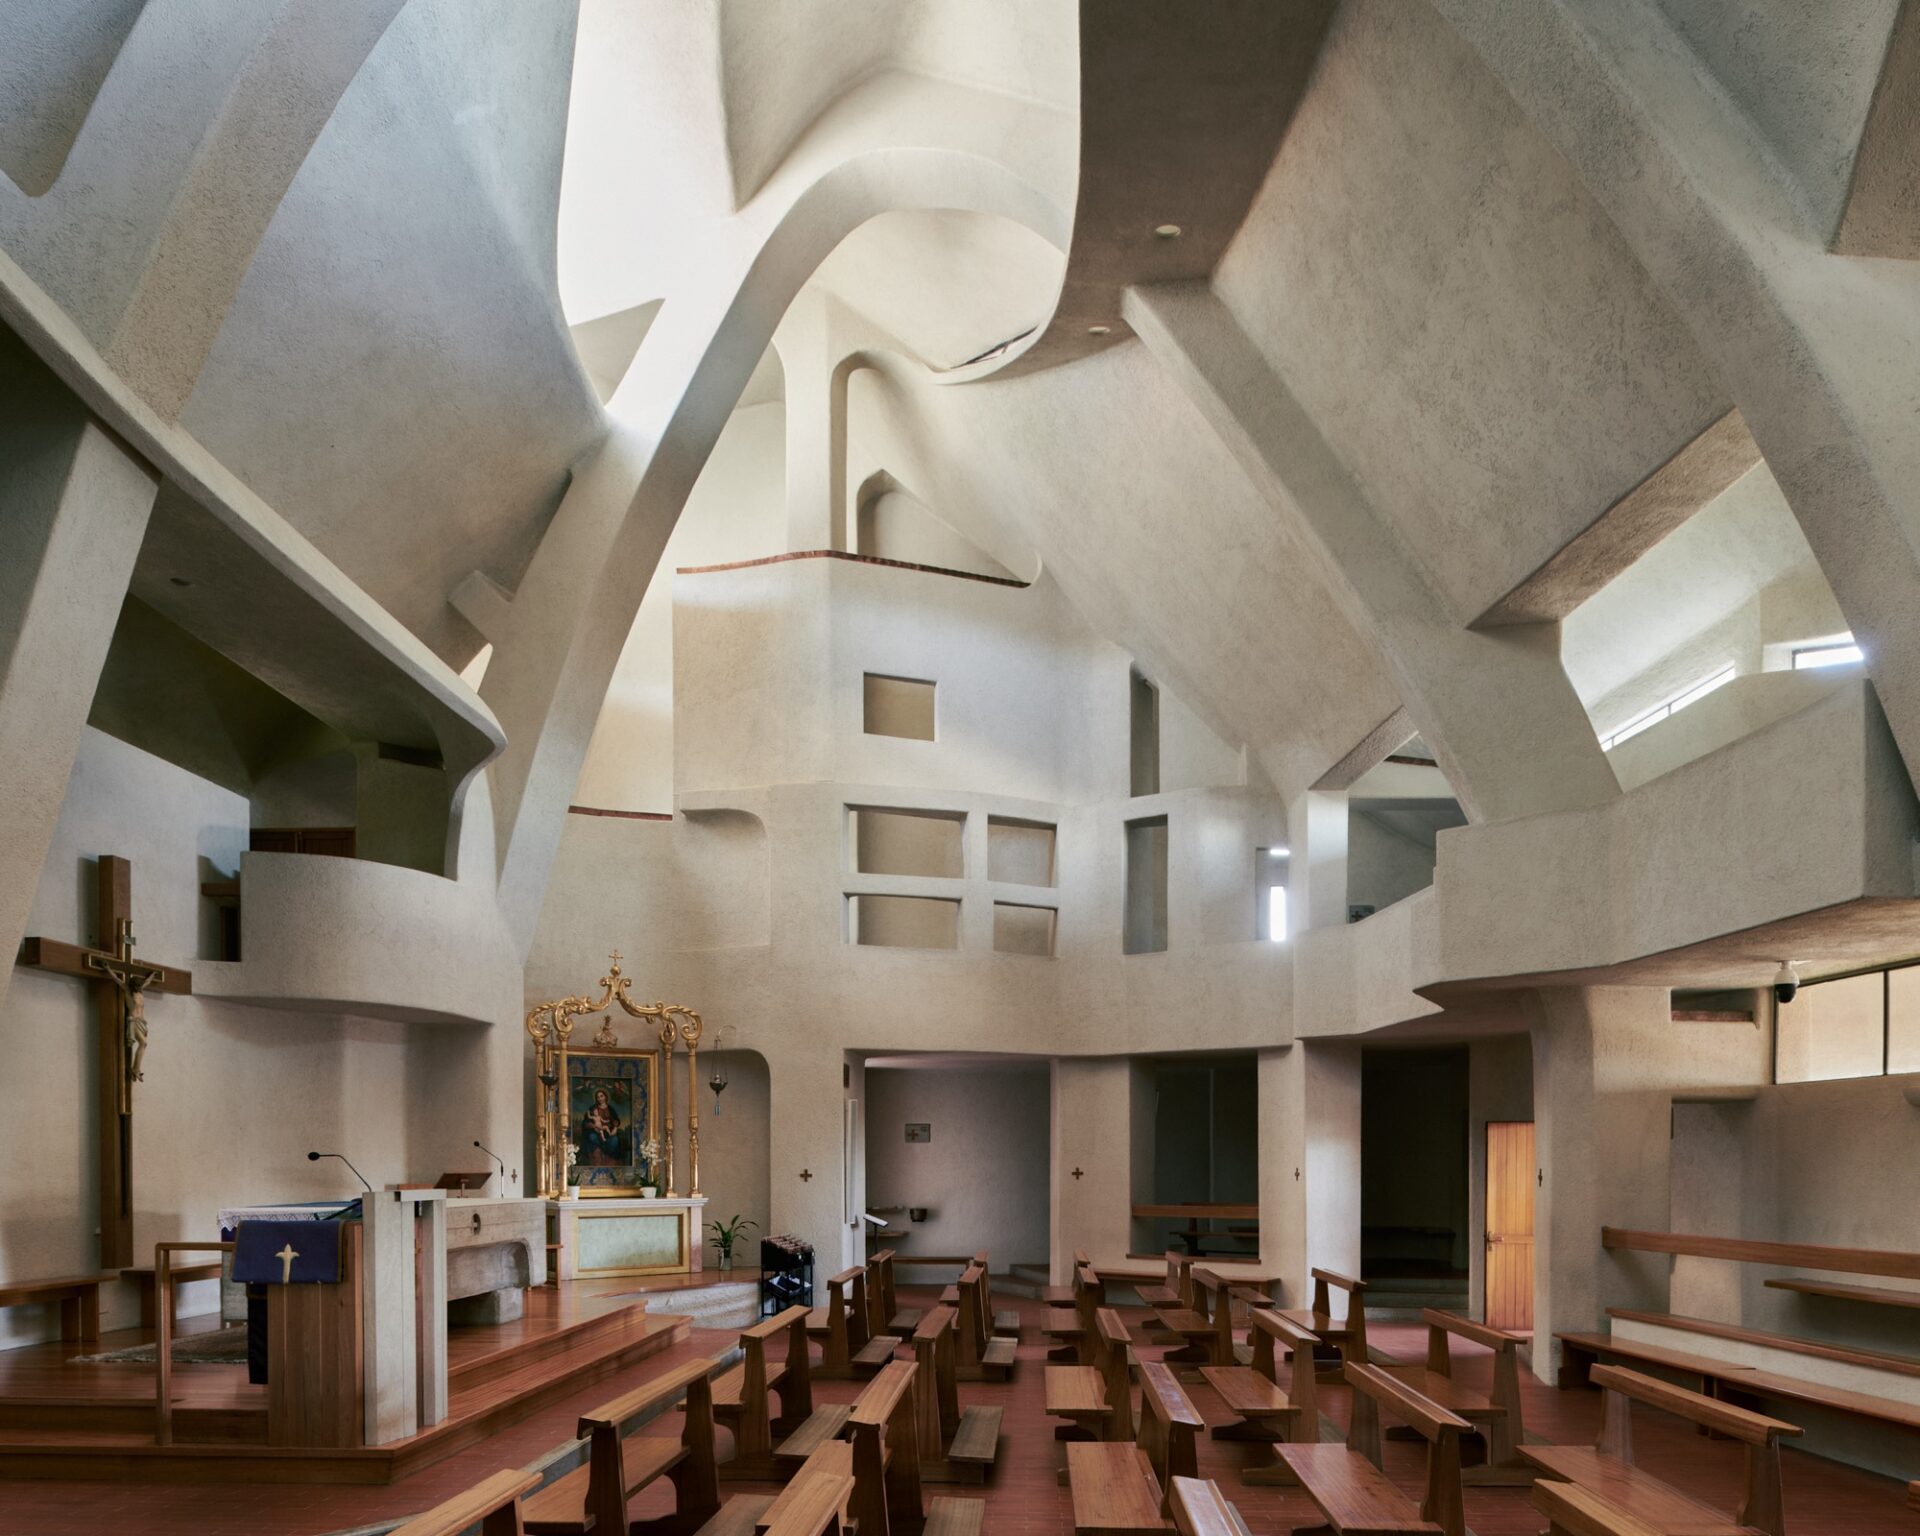 an interior overview of a large brutalist church with angular concrete walls and wooden pews